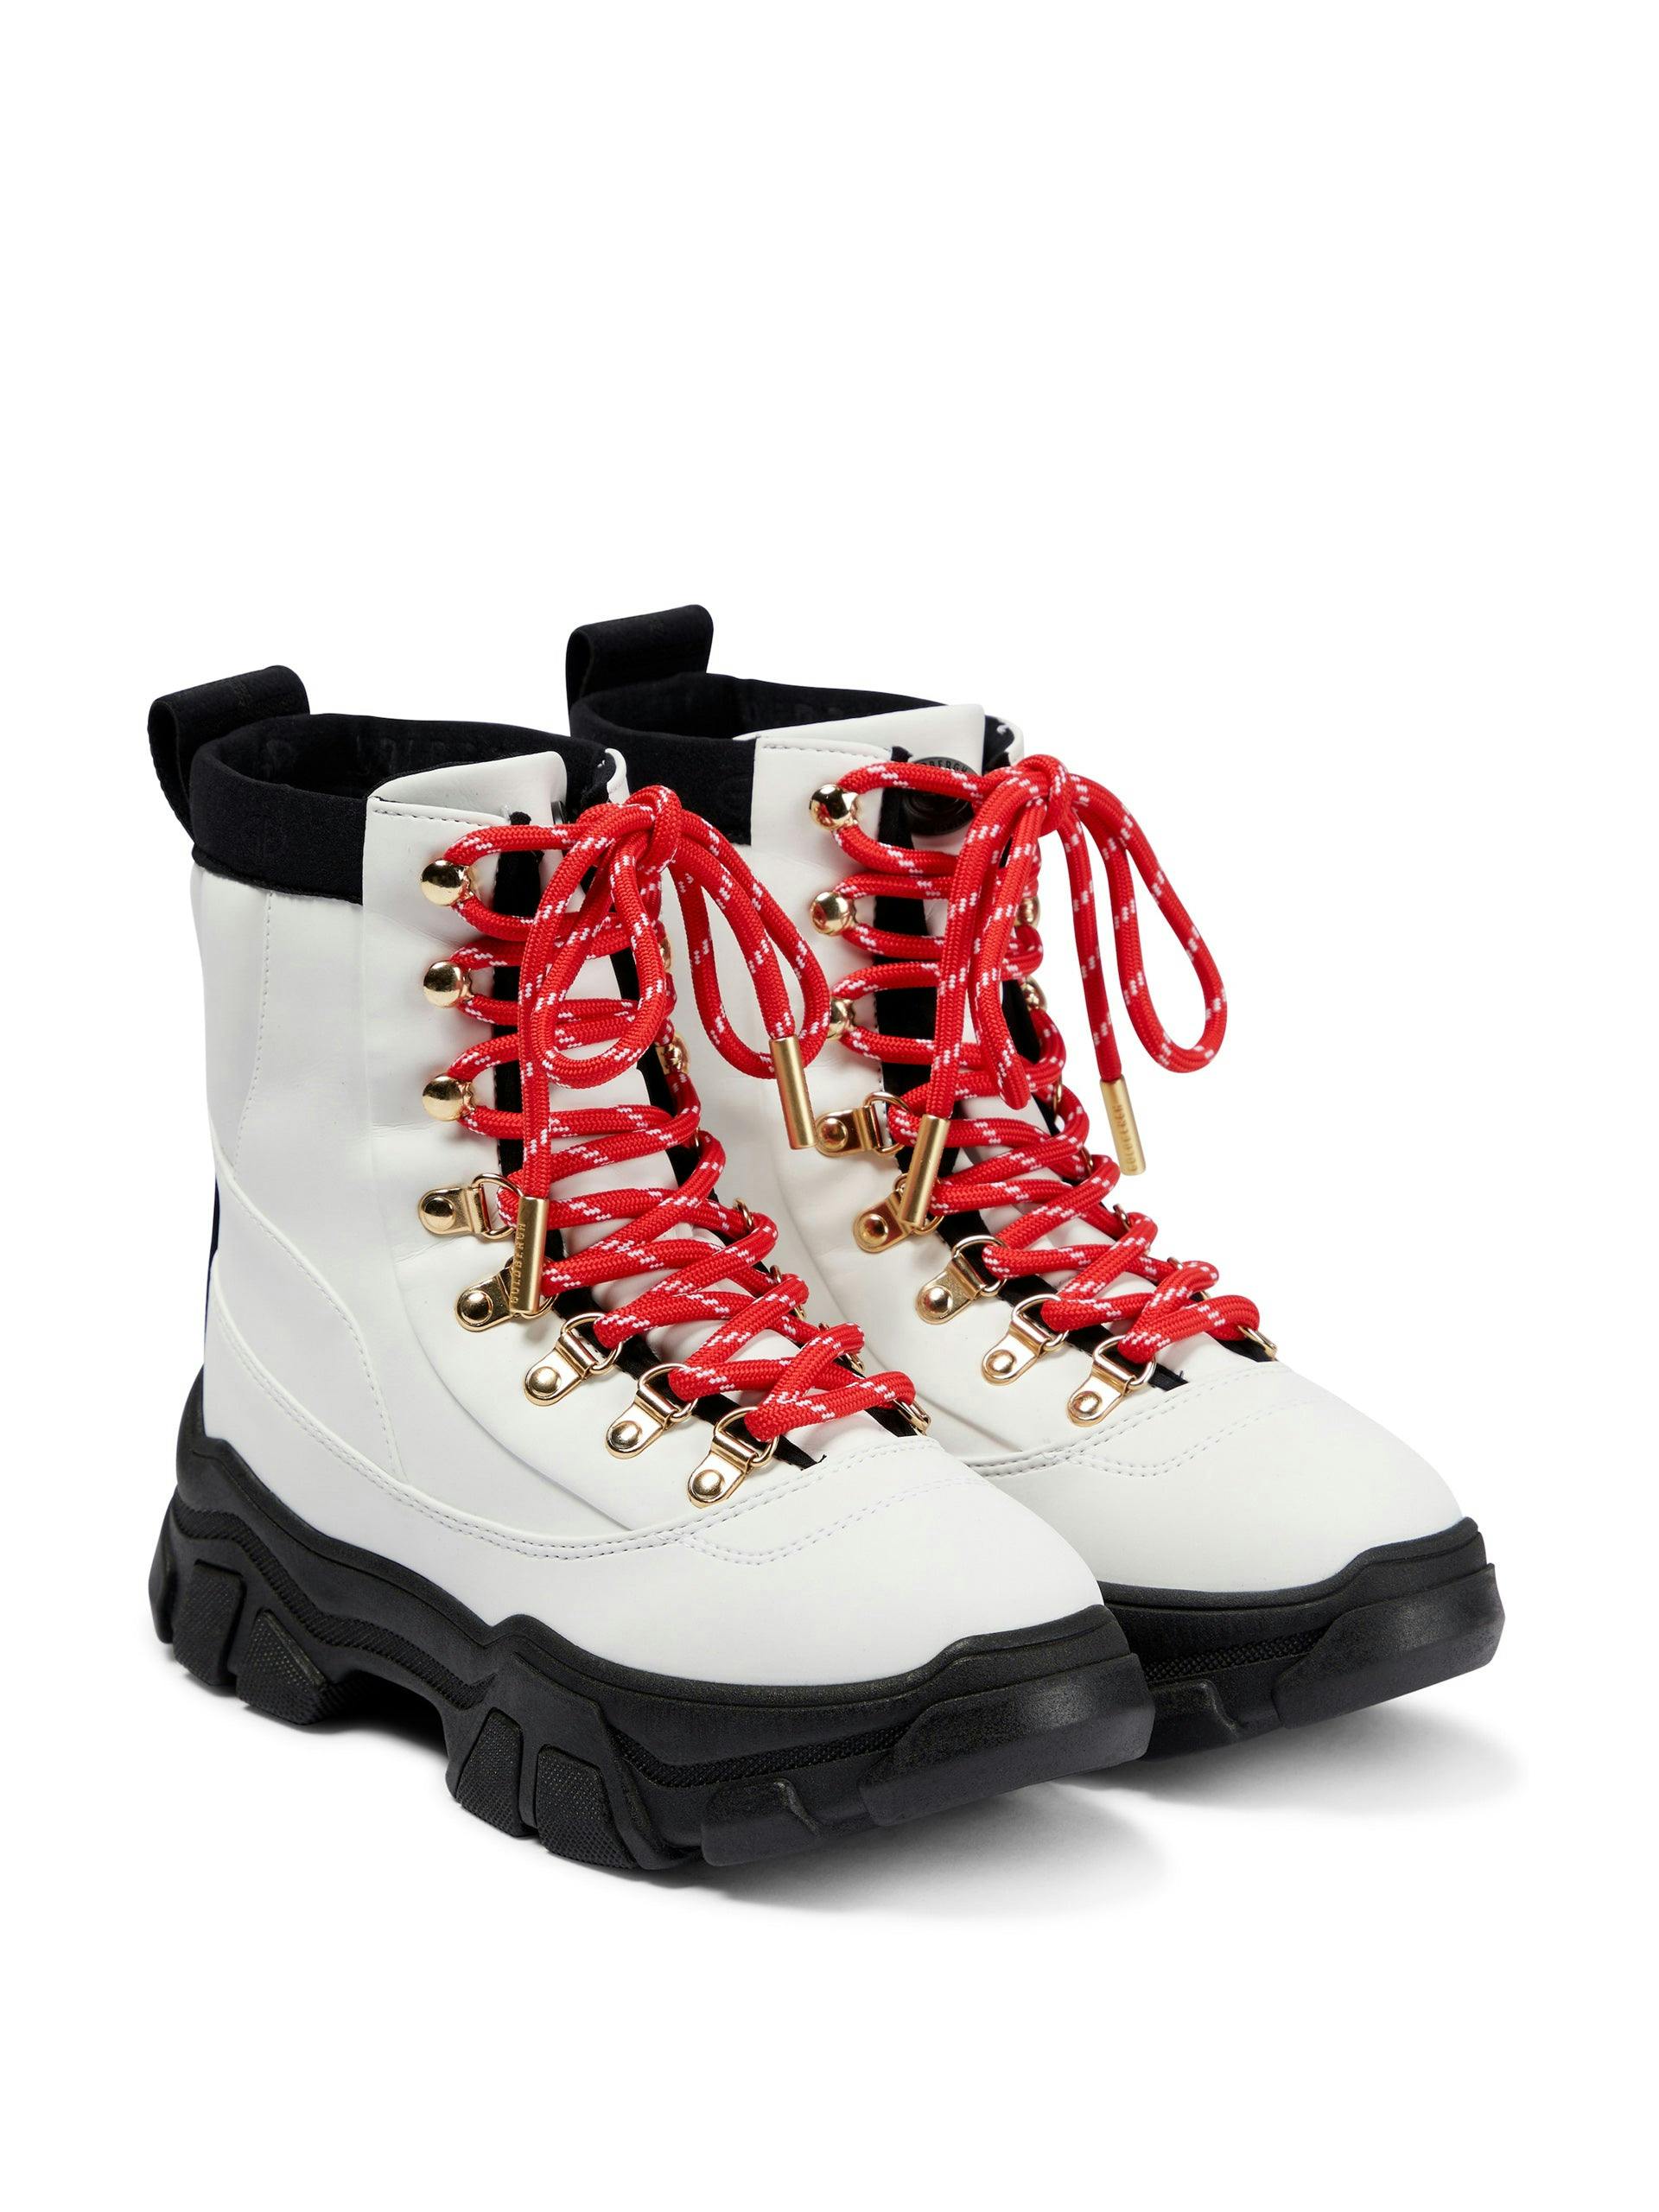 Hike snow boots